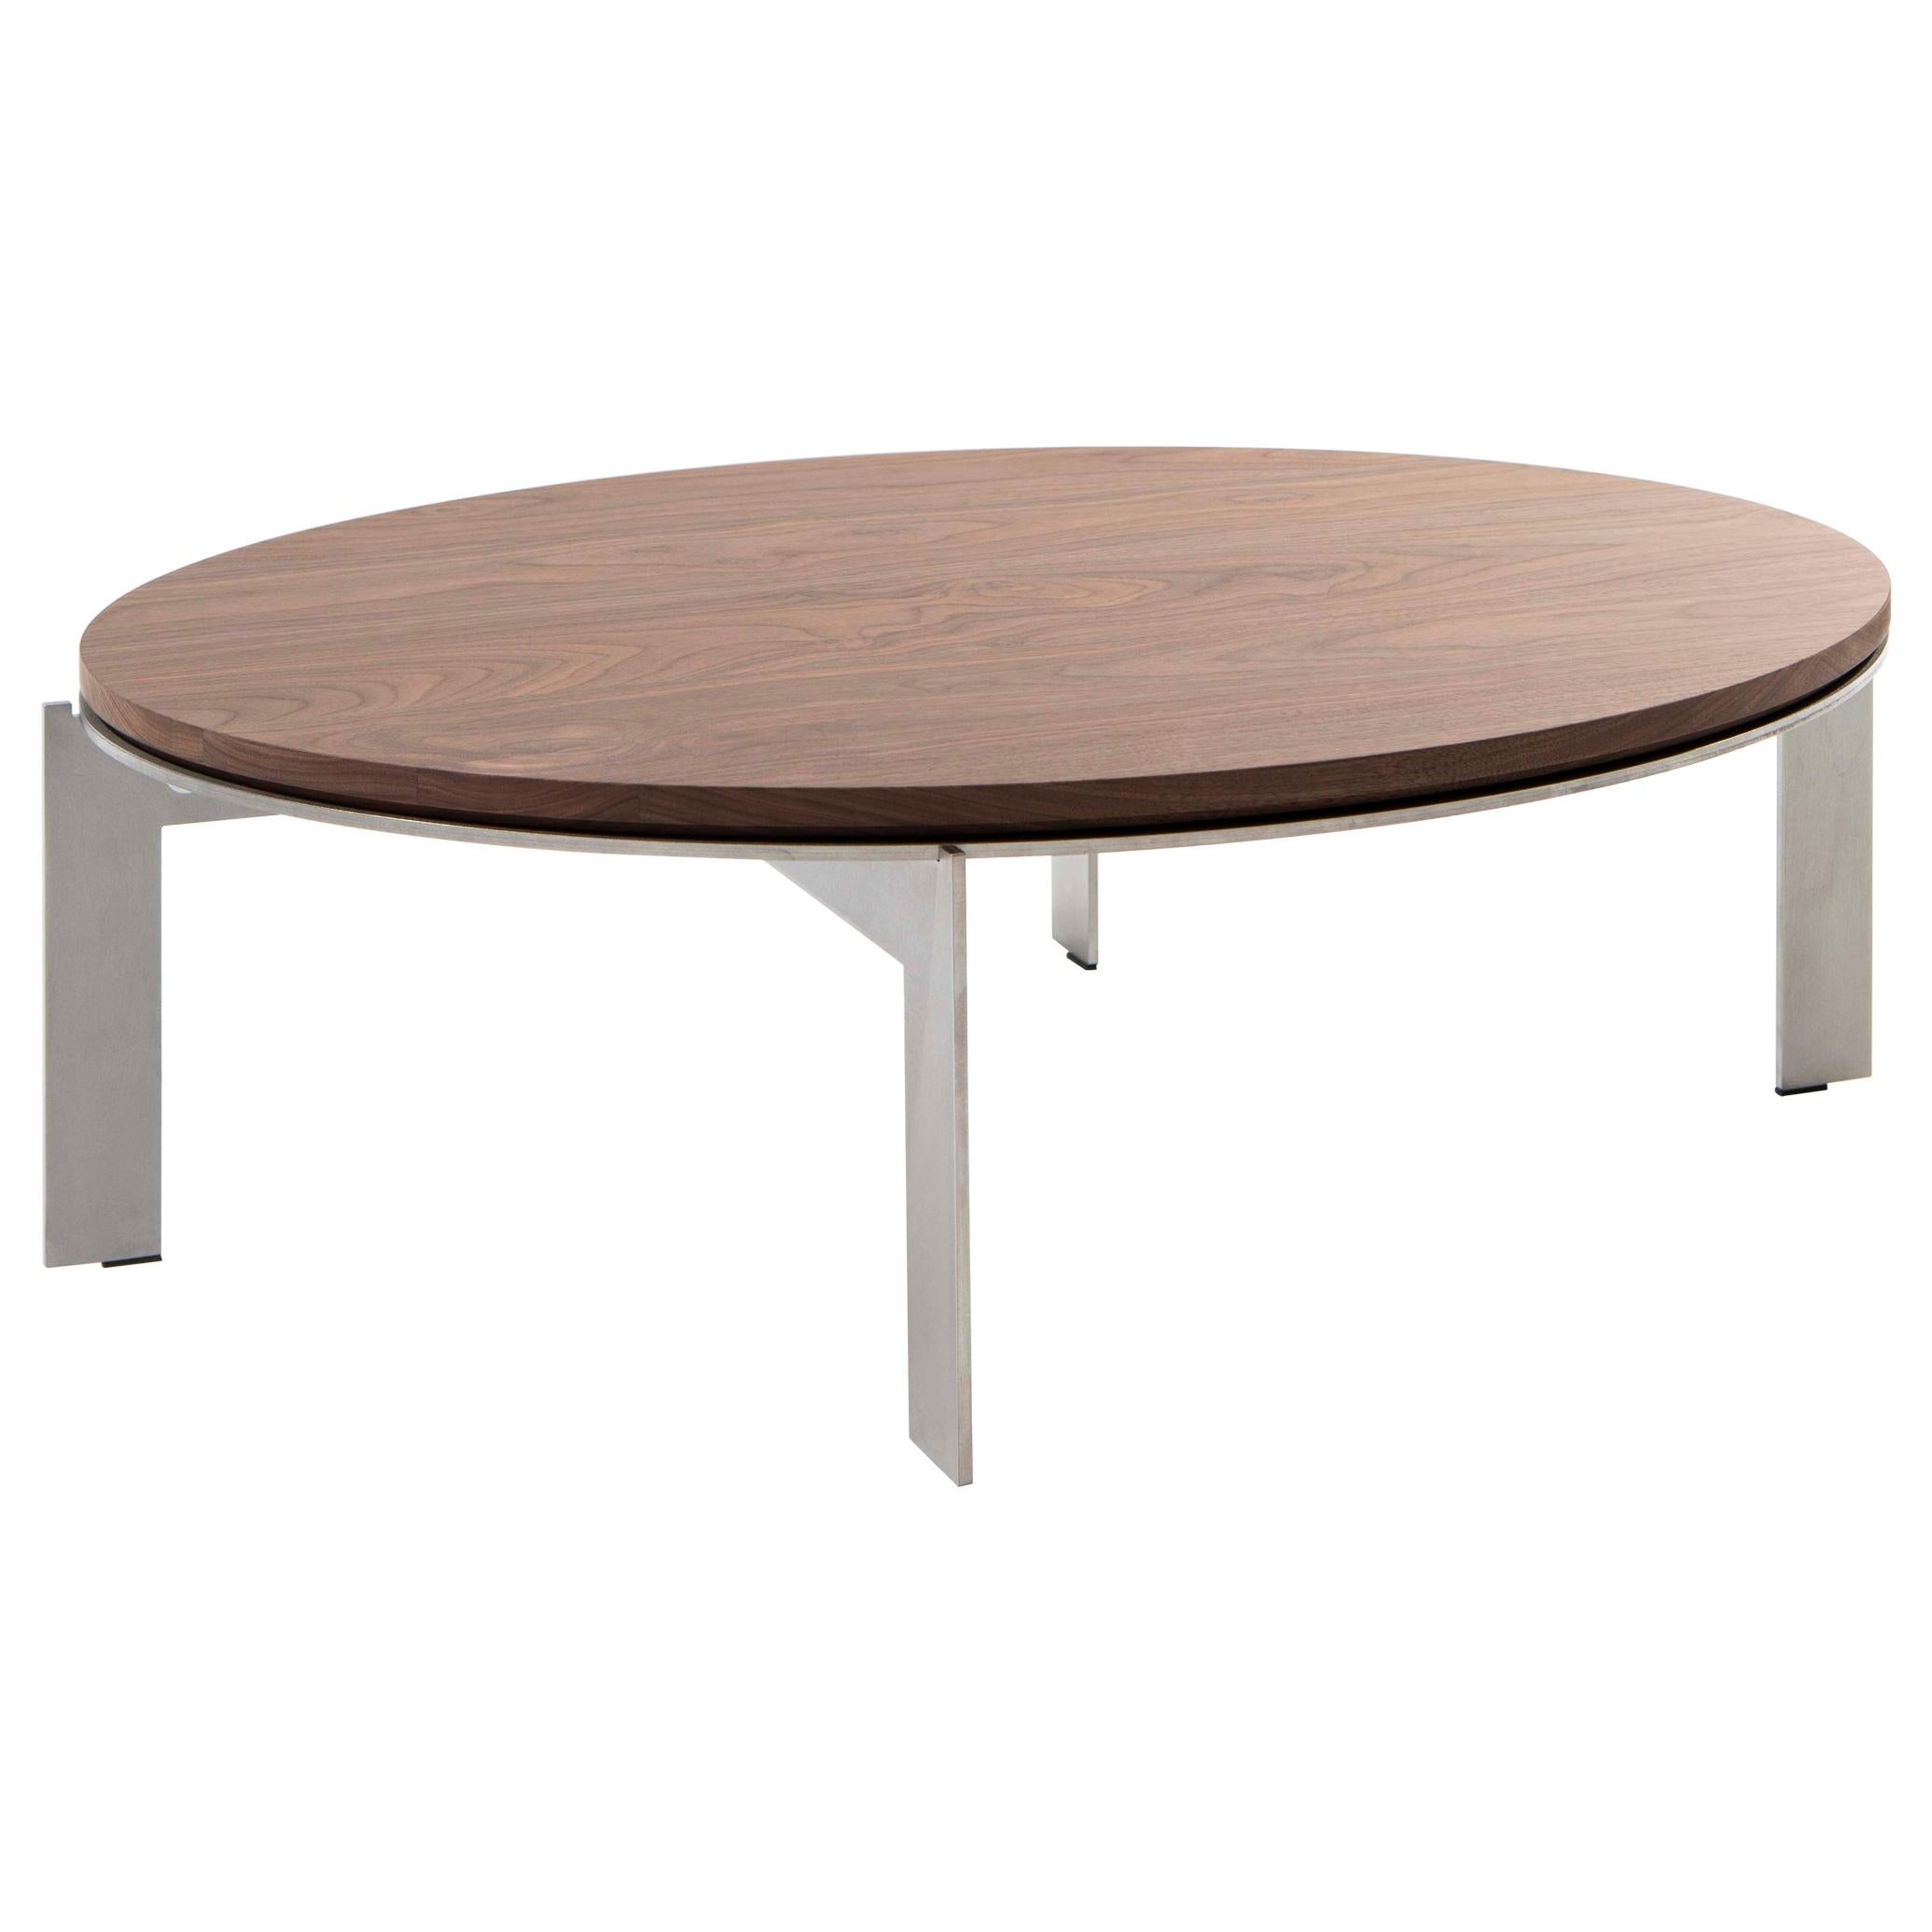 Modern contemporary oval ellipse side table, steel and walnut wood, Belgium